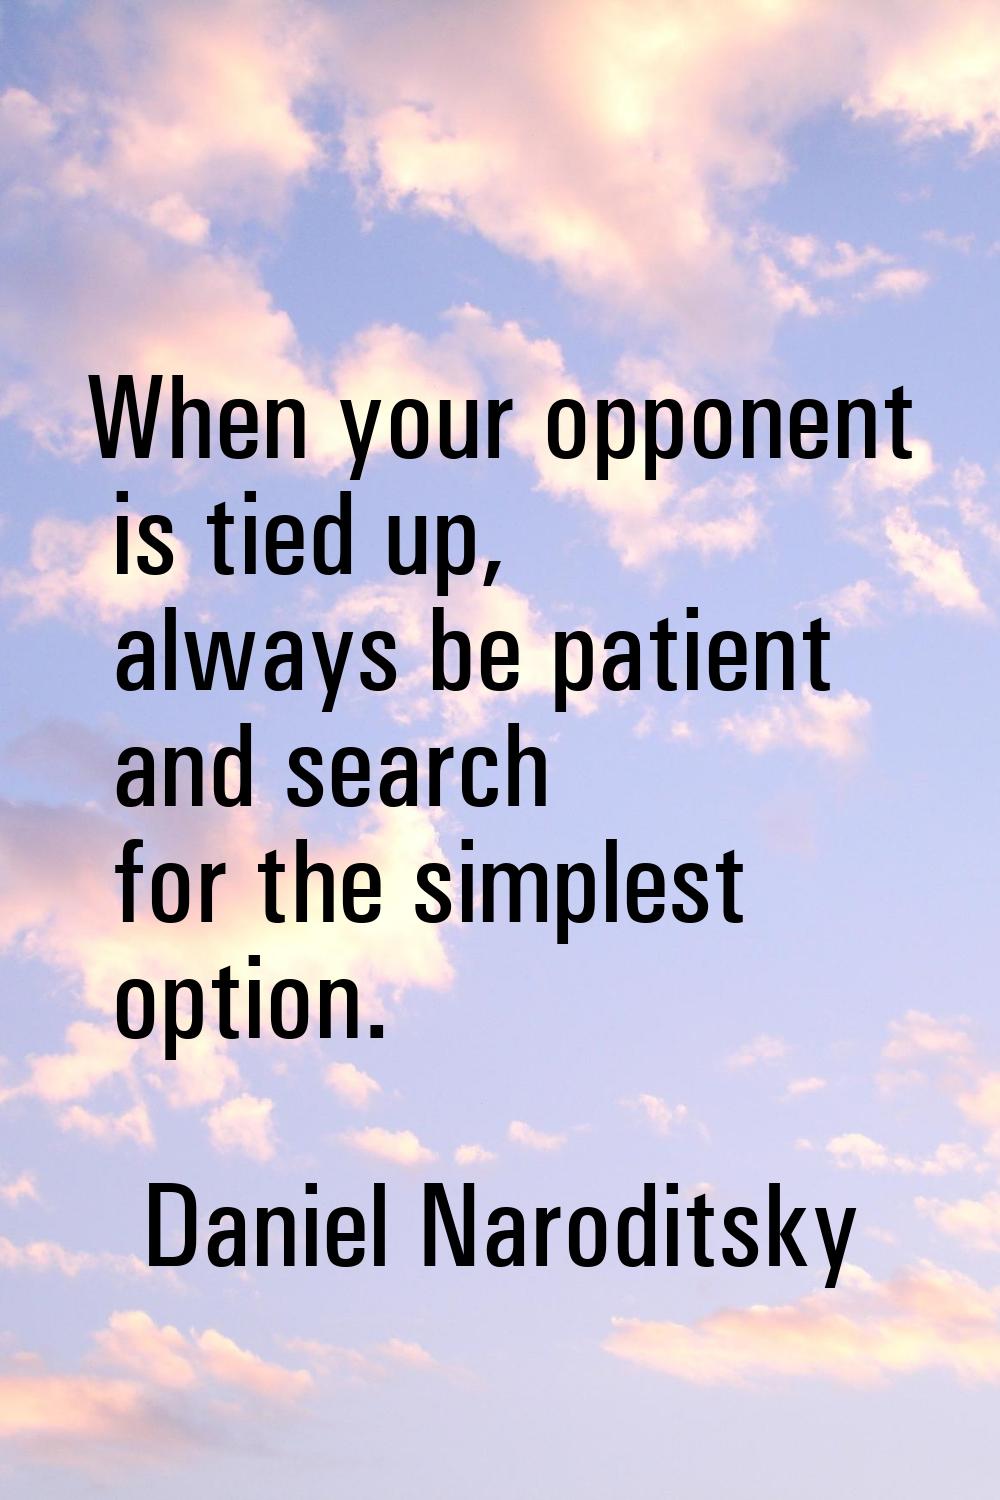 When your opponent is tied up, always be patient and search for the simplest option.